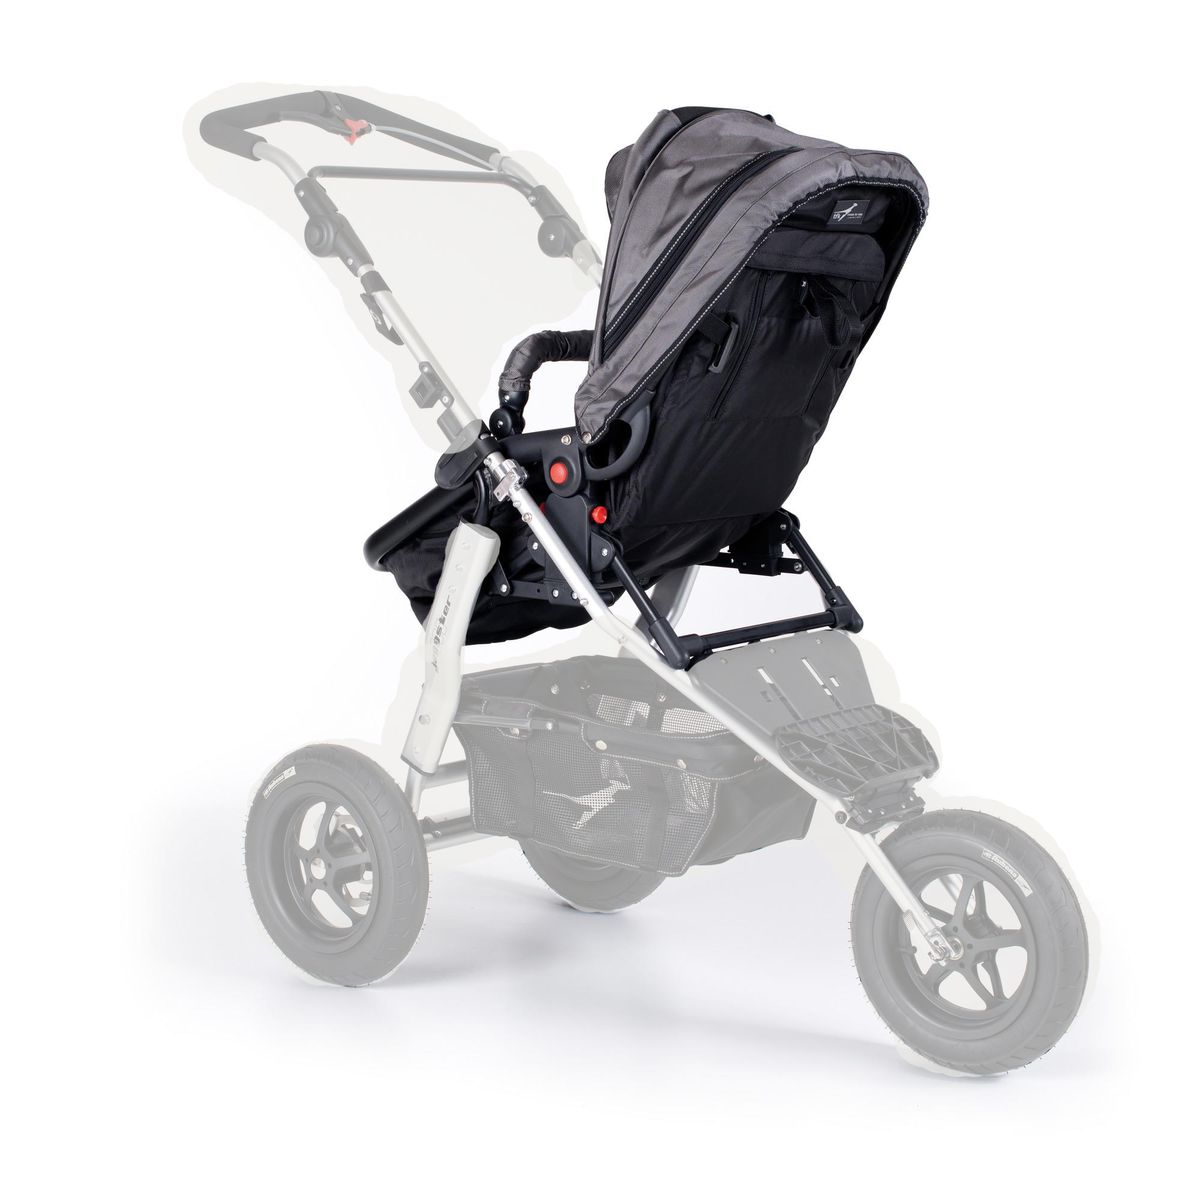 TFK Multi X Carrycot-Carrycots-Trends for Kids-Red-www.hellomom.co.za